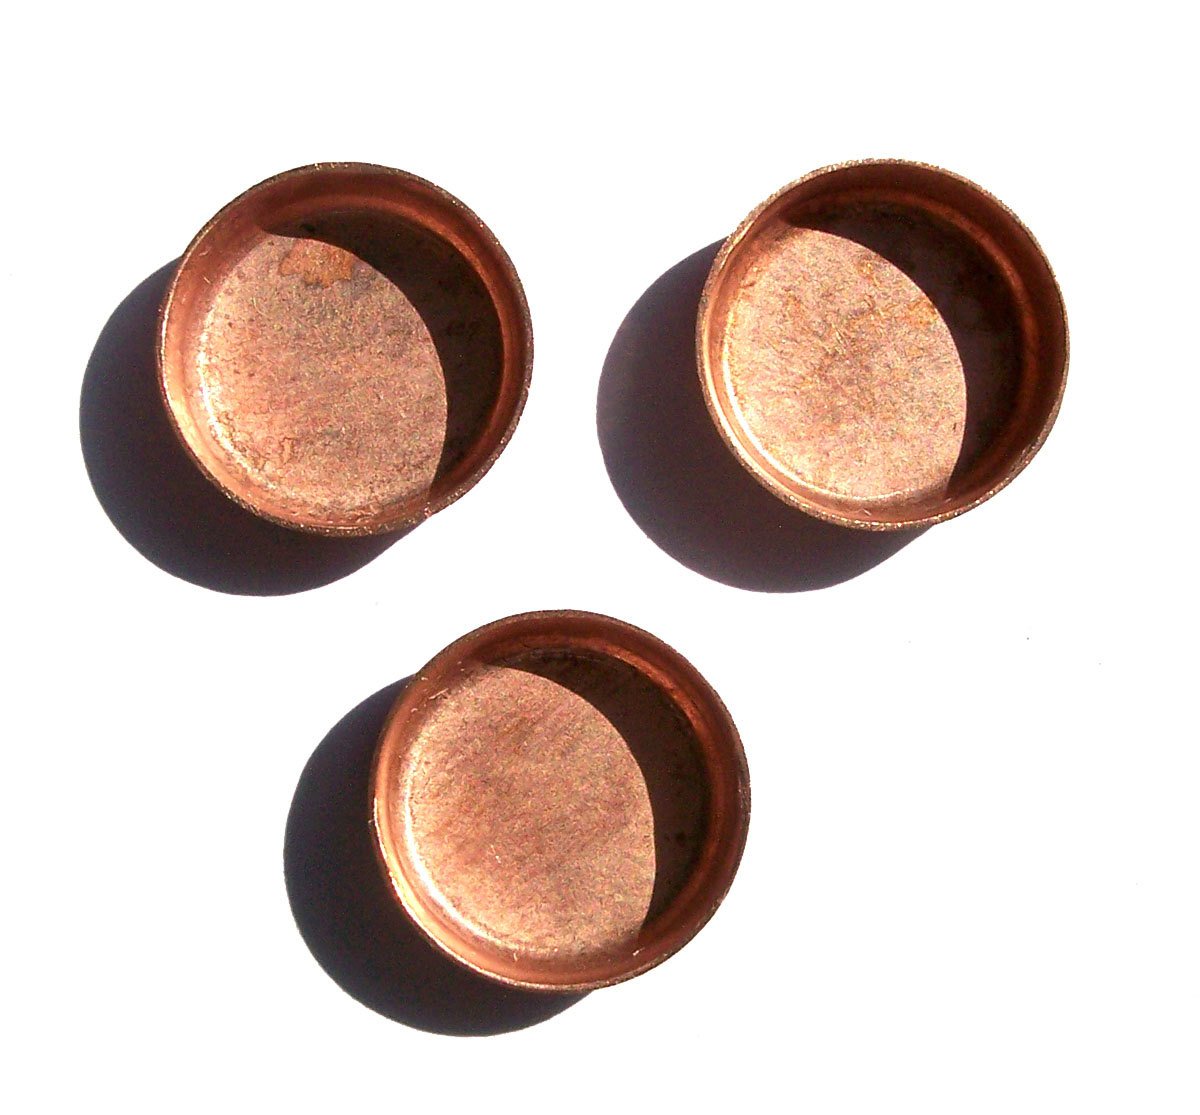 Bezel Cups Round 26G 14.8mm OD 3.3mm tall for Enameling Soldering Stamping Jewelry Making Supplies, Variety of Metals - 6 Pieces